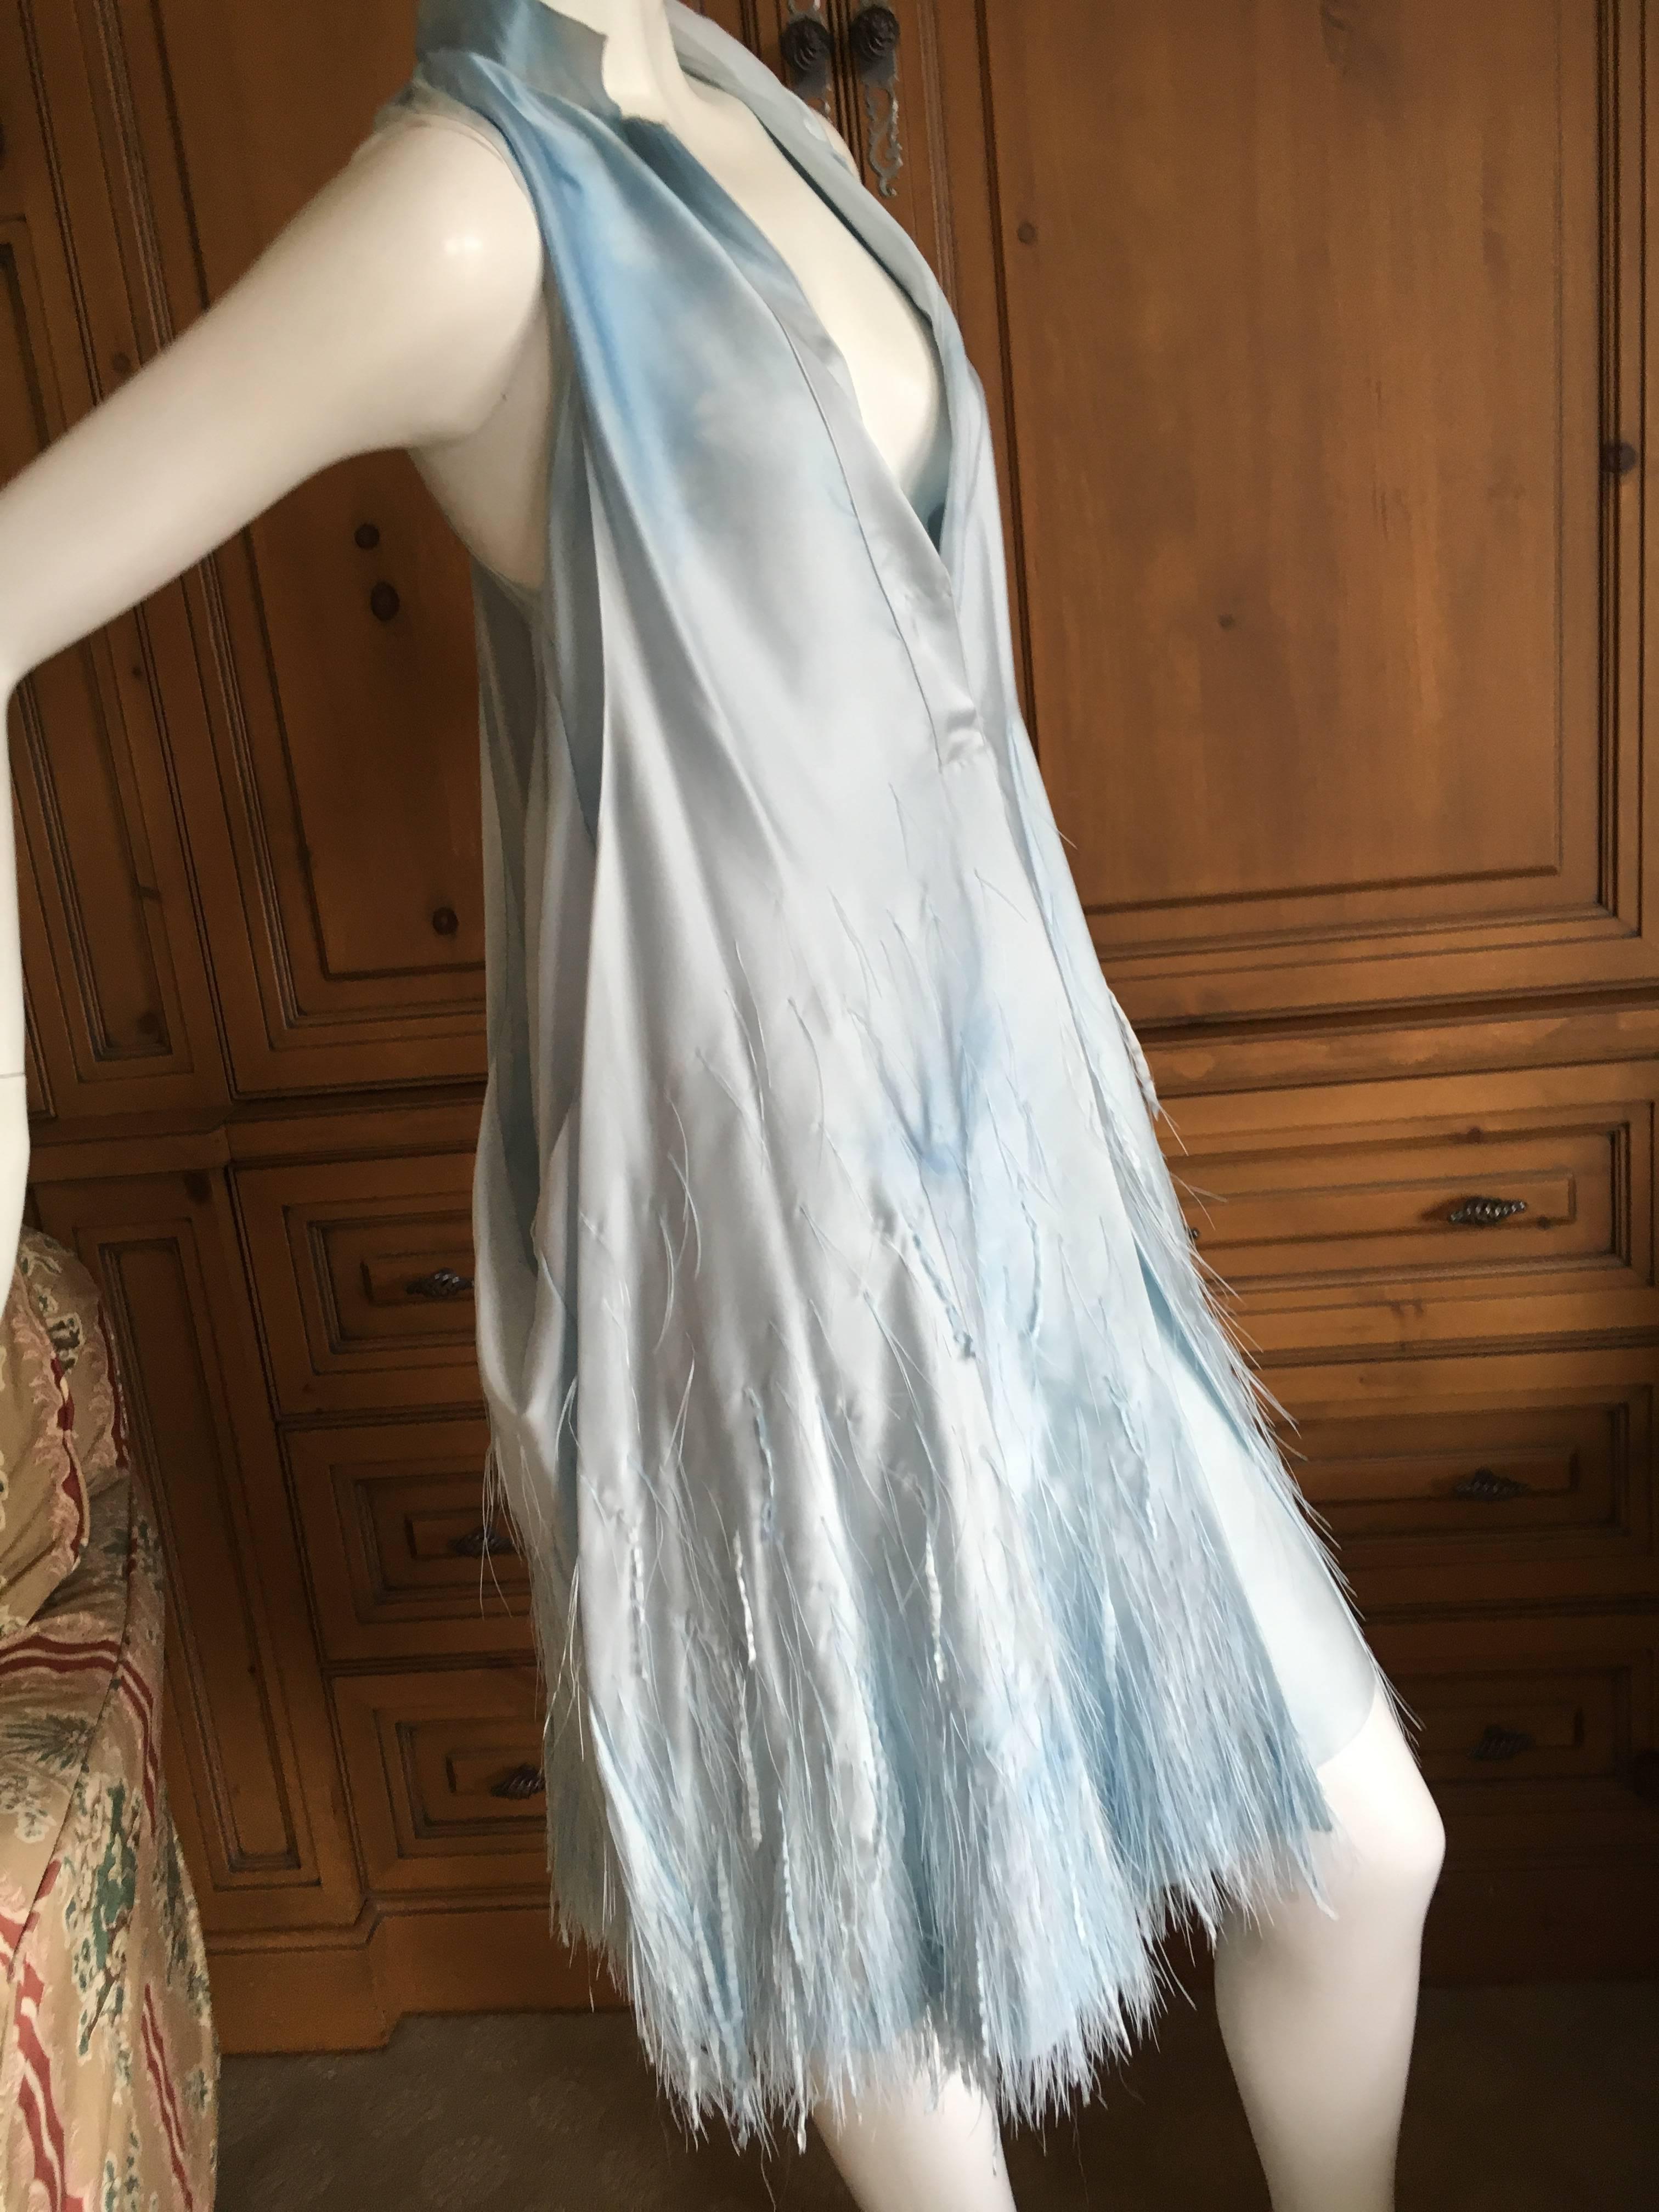 Bottega Veneta Pale Turquoise Feathered Silk Dress by Tomas Maier In Good Condition For Sale In Cloverdale, CA